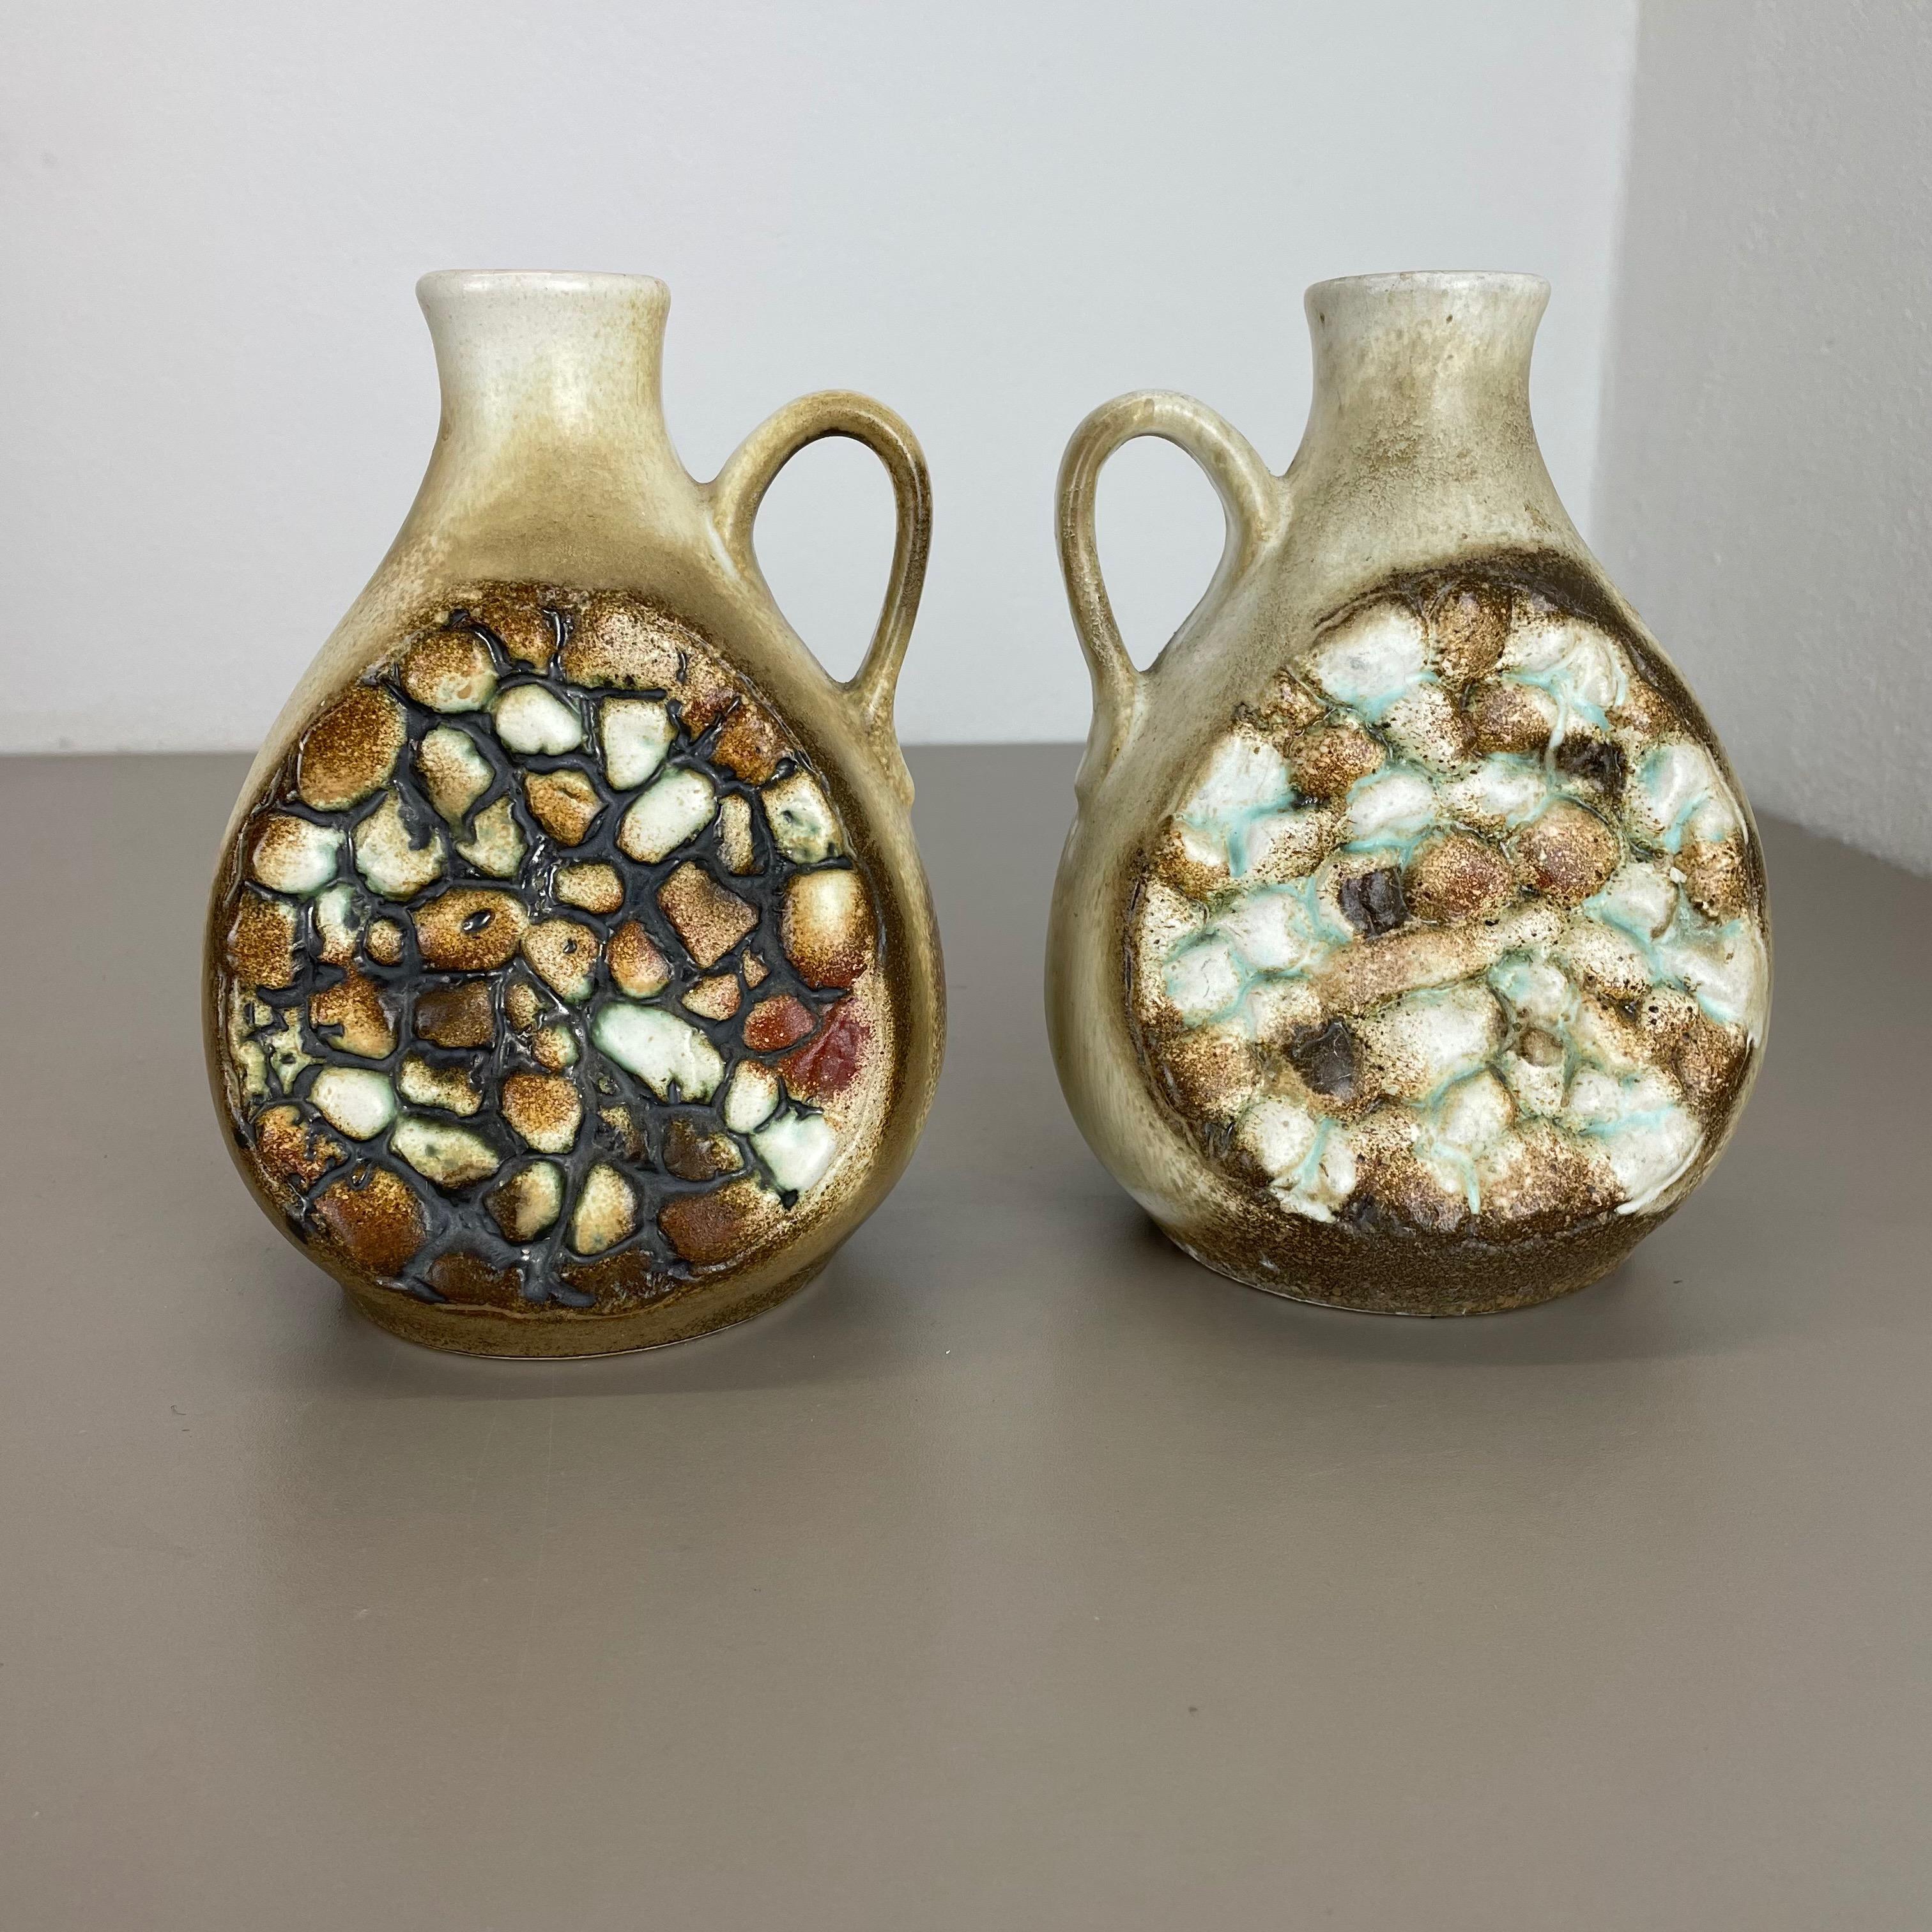 Article:

Pottery ceramic vase set of 2


Producer:

Dümler and Breiden, Germany


Decade:

1960s



Description:

Original vintage 1960s pottery ceramic vases in Germany. High quality German production with a nice abstract